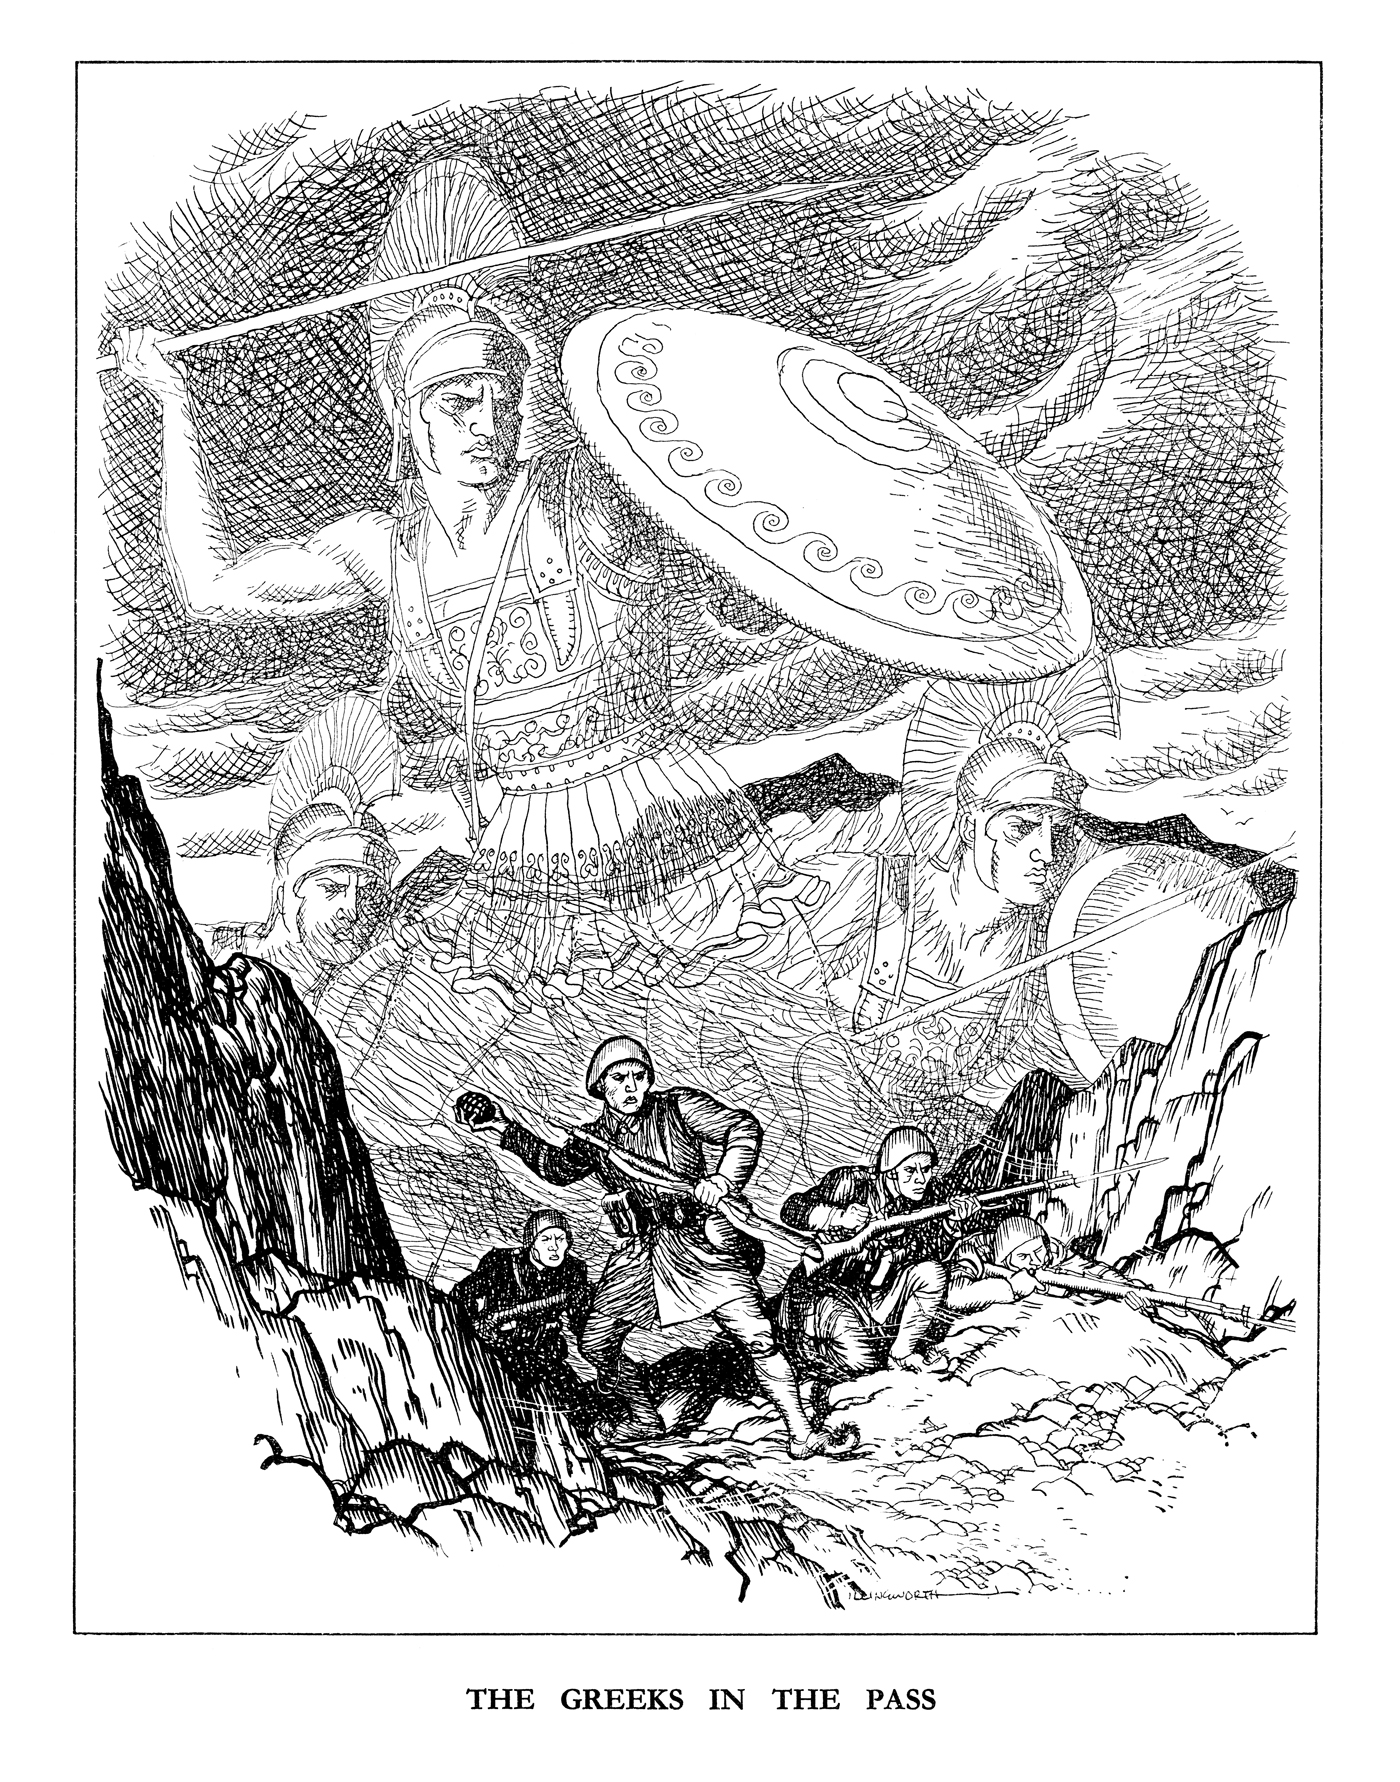 The Greeks in the Pass. Published in Punch 27 November 1940. As the Greek Army battles the Italians they are watched over by the heroic defenders of Thermopylae more than two thousand years before. By Leslie Illingworth © Punch Ltd